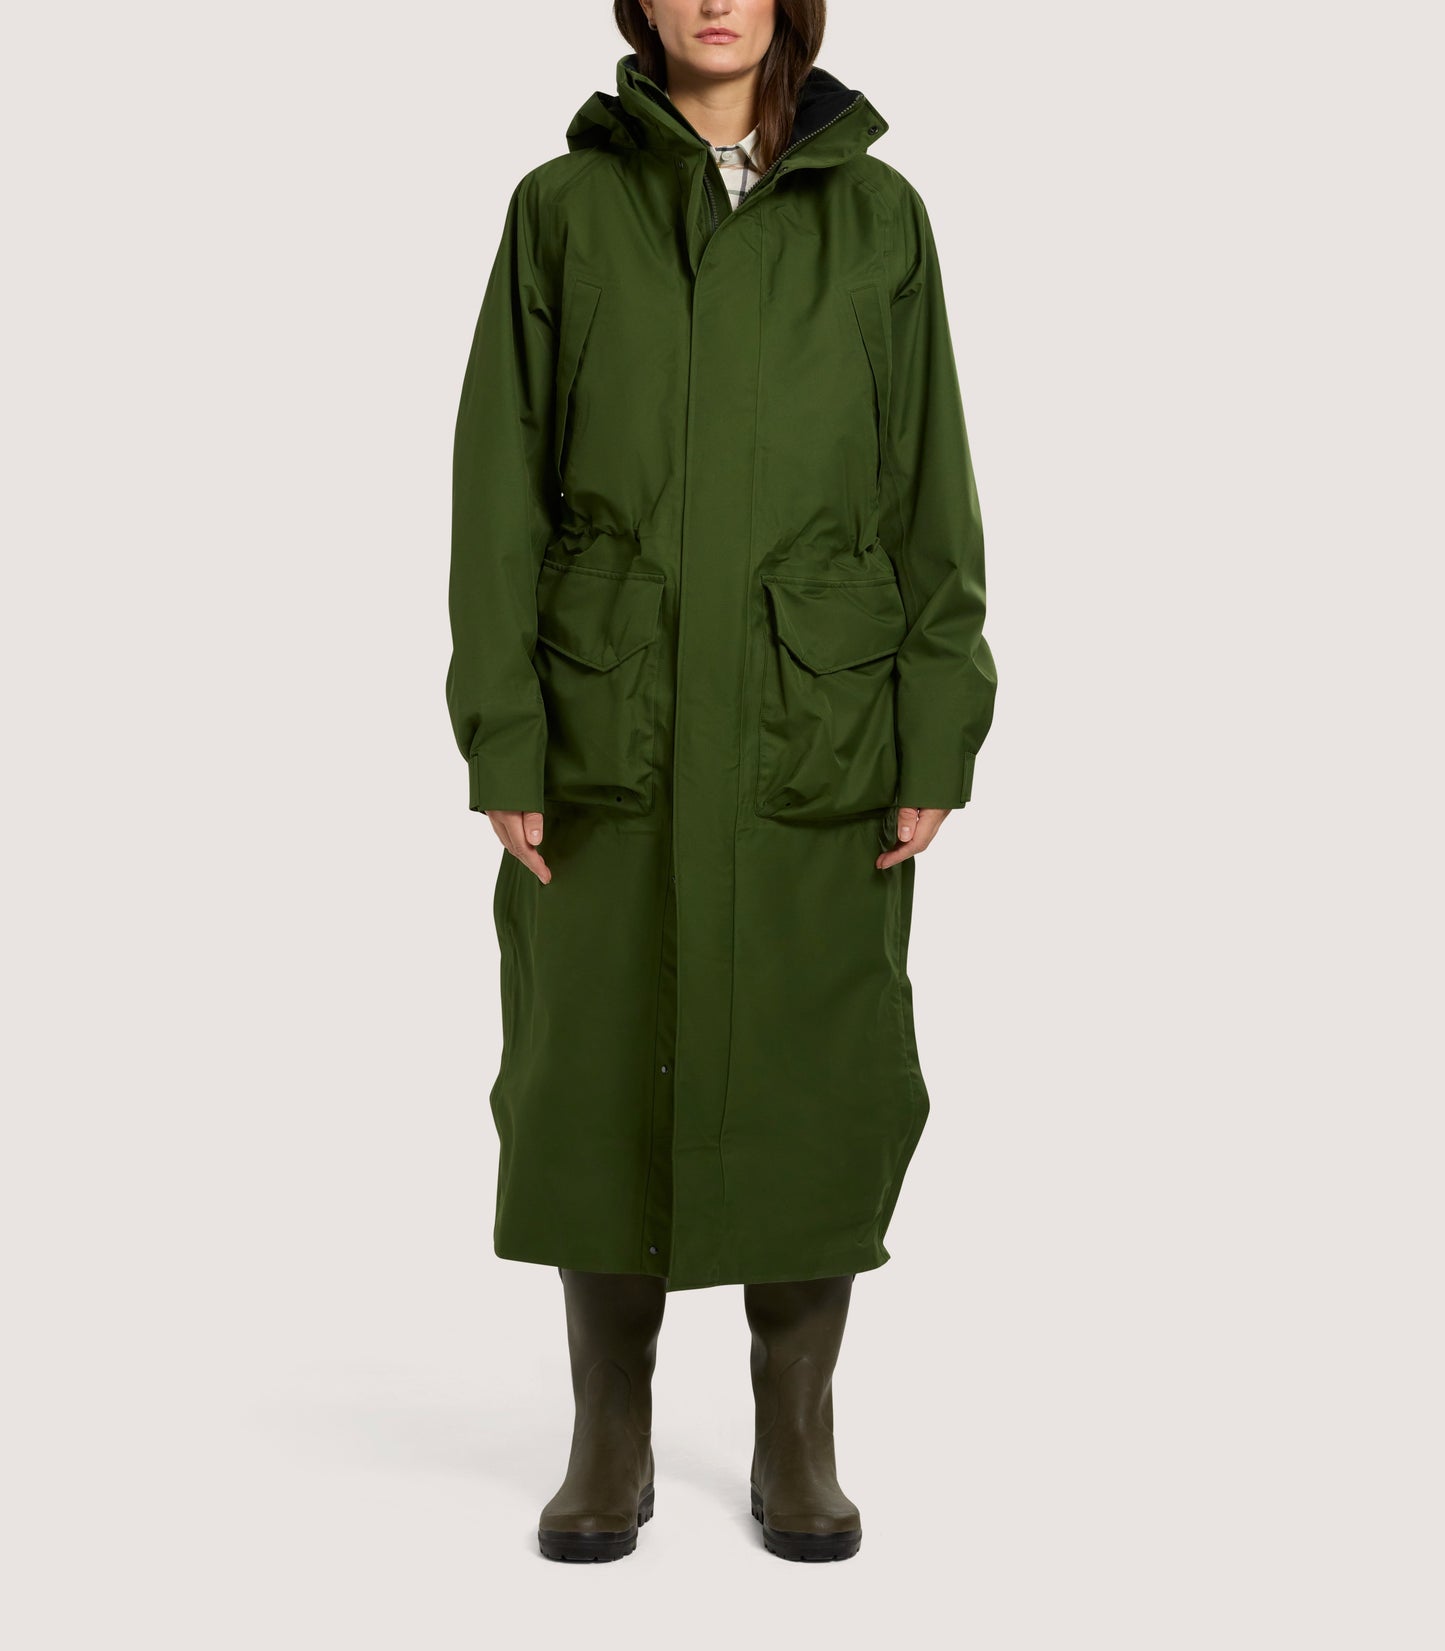 Unisex Technical Vatersay Sporting Cape In Rifle Green